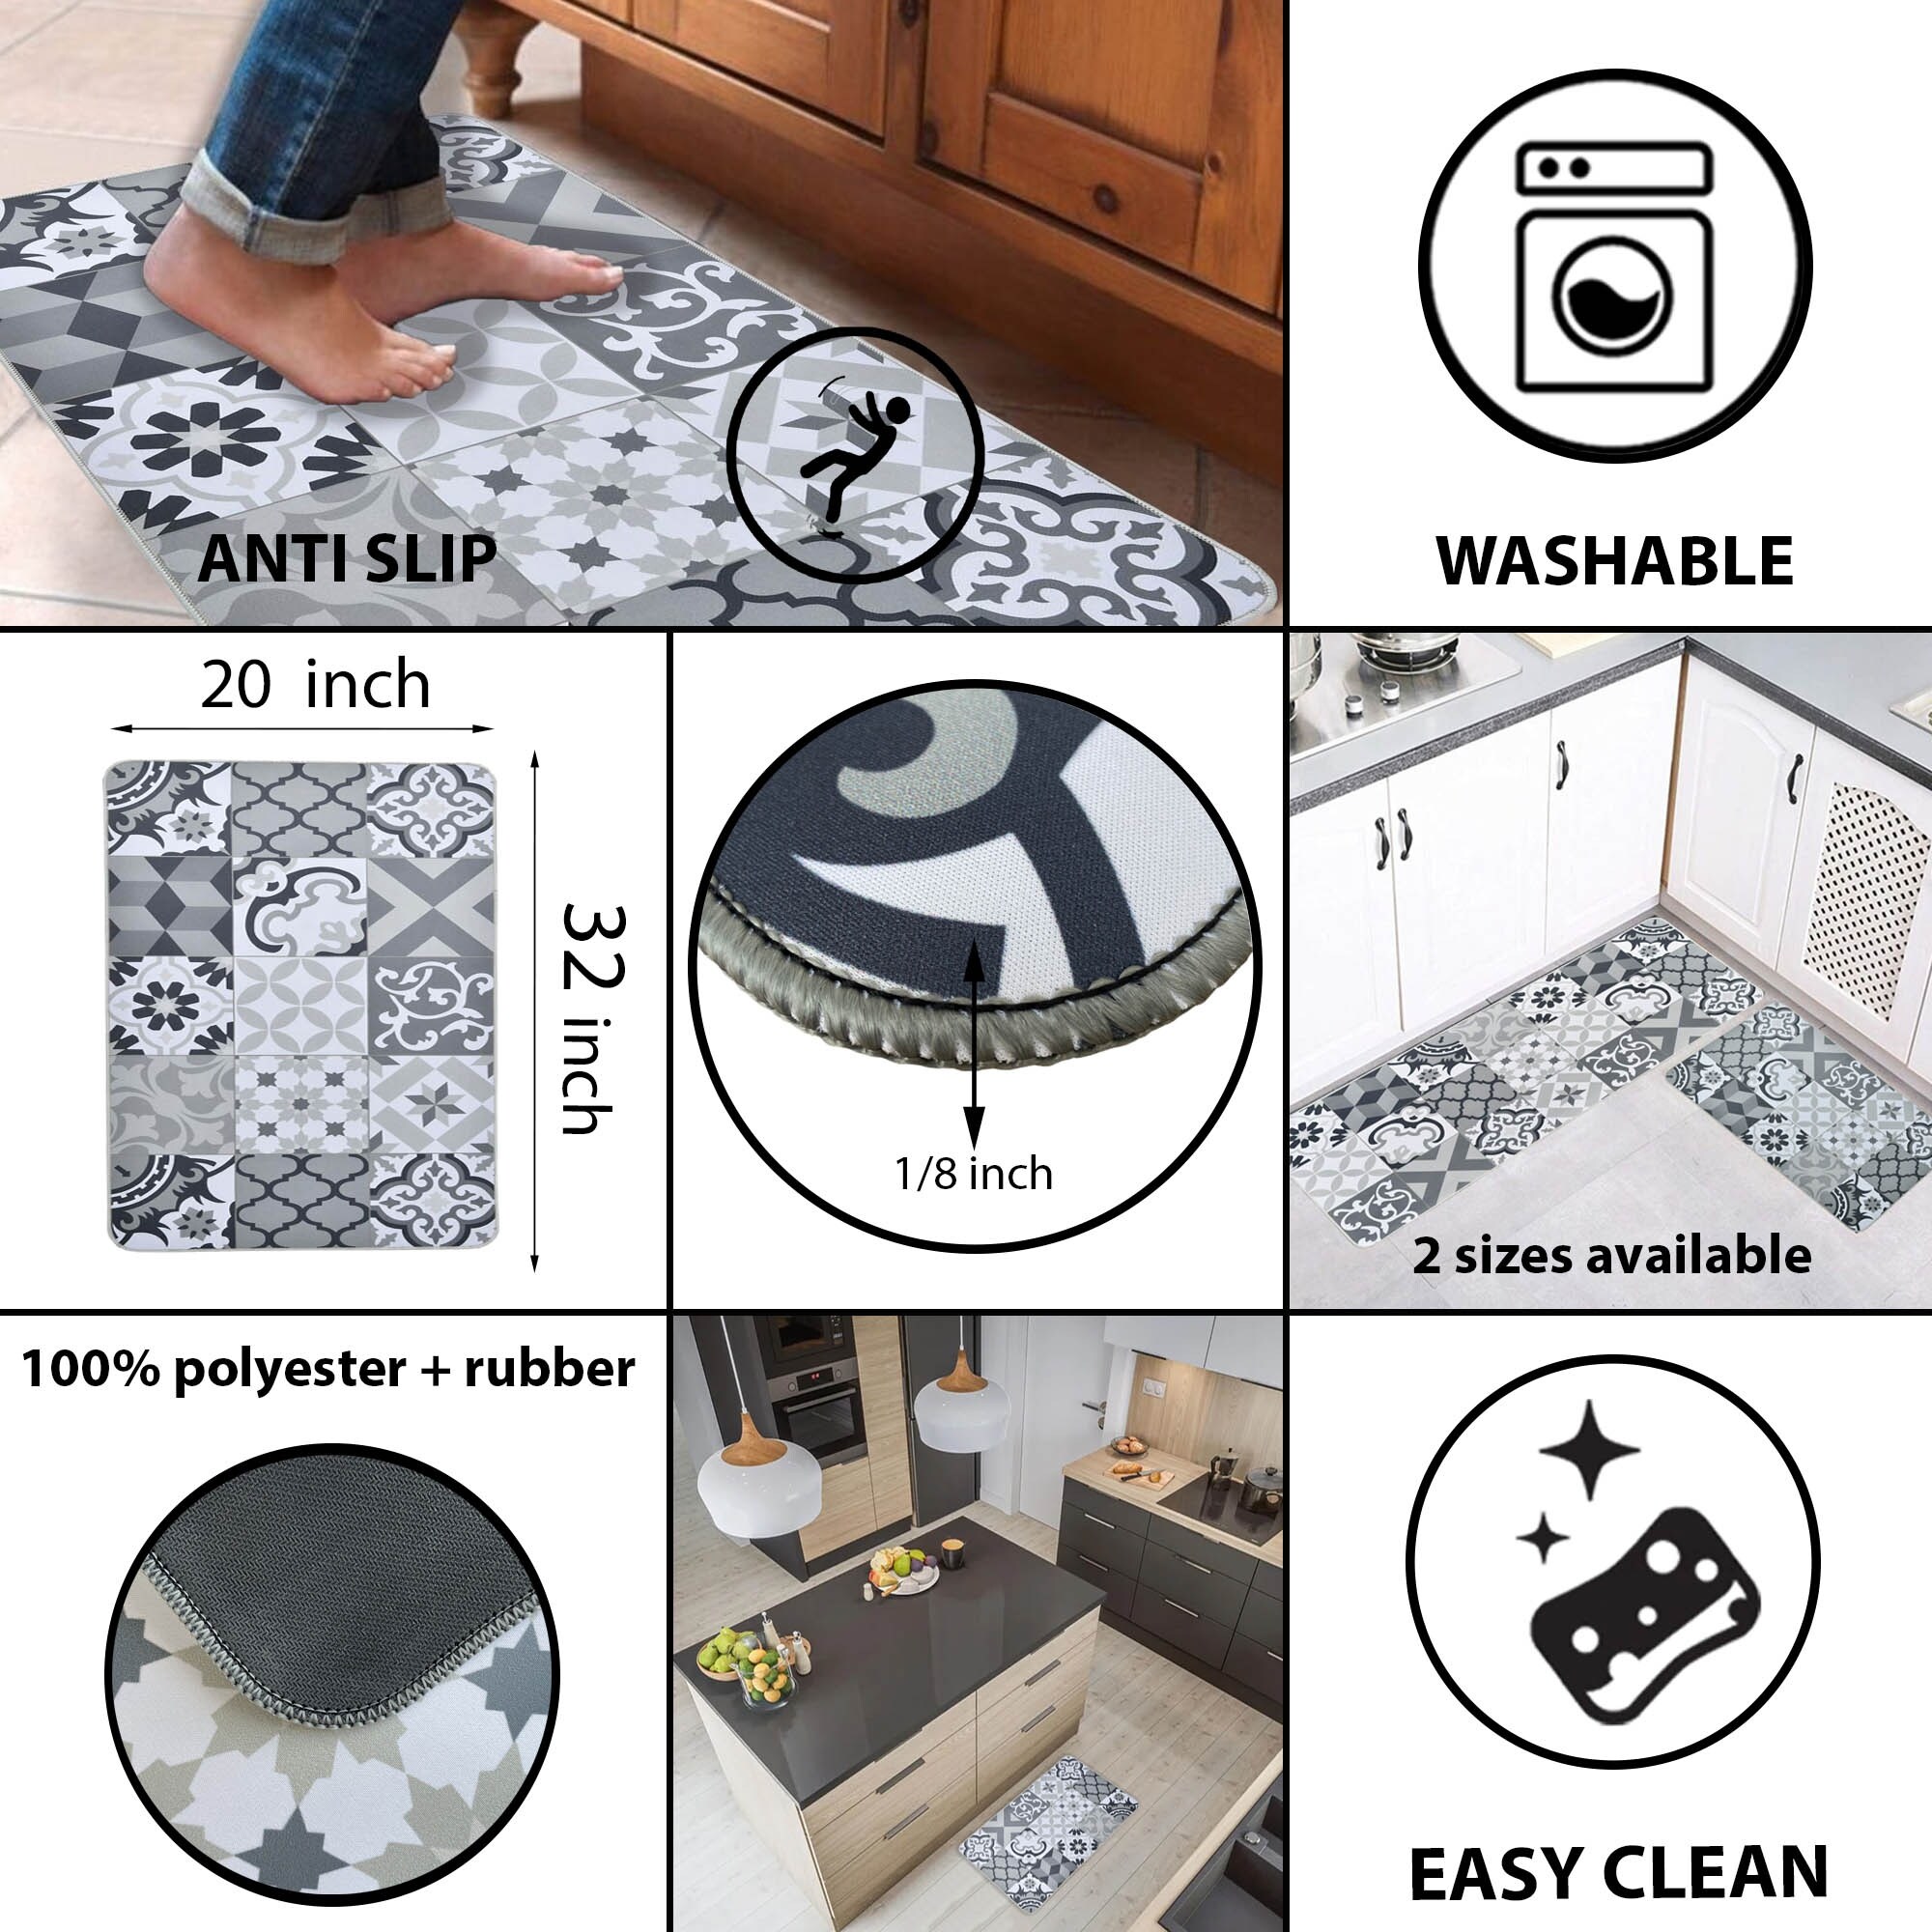 https://ak1.ostkcdn.com/images/products/is/images/direct/c3d1b737f6486d929292f791b1e2149b12d78a73/Ceramic-Tile-Pattern-Anti-Fatigue-Kitchen-Floor-Mat-32%22-x-20%22.jpg